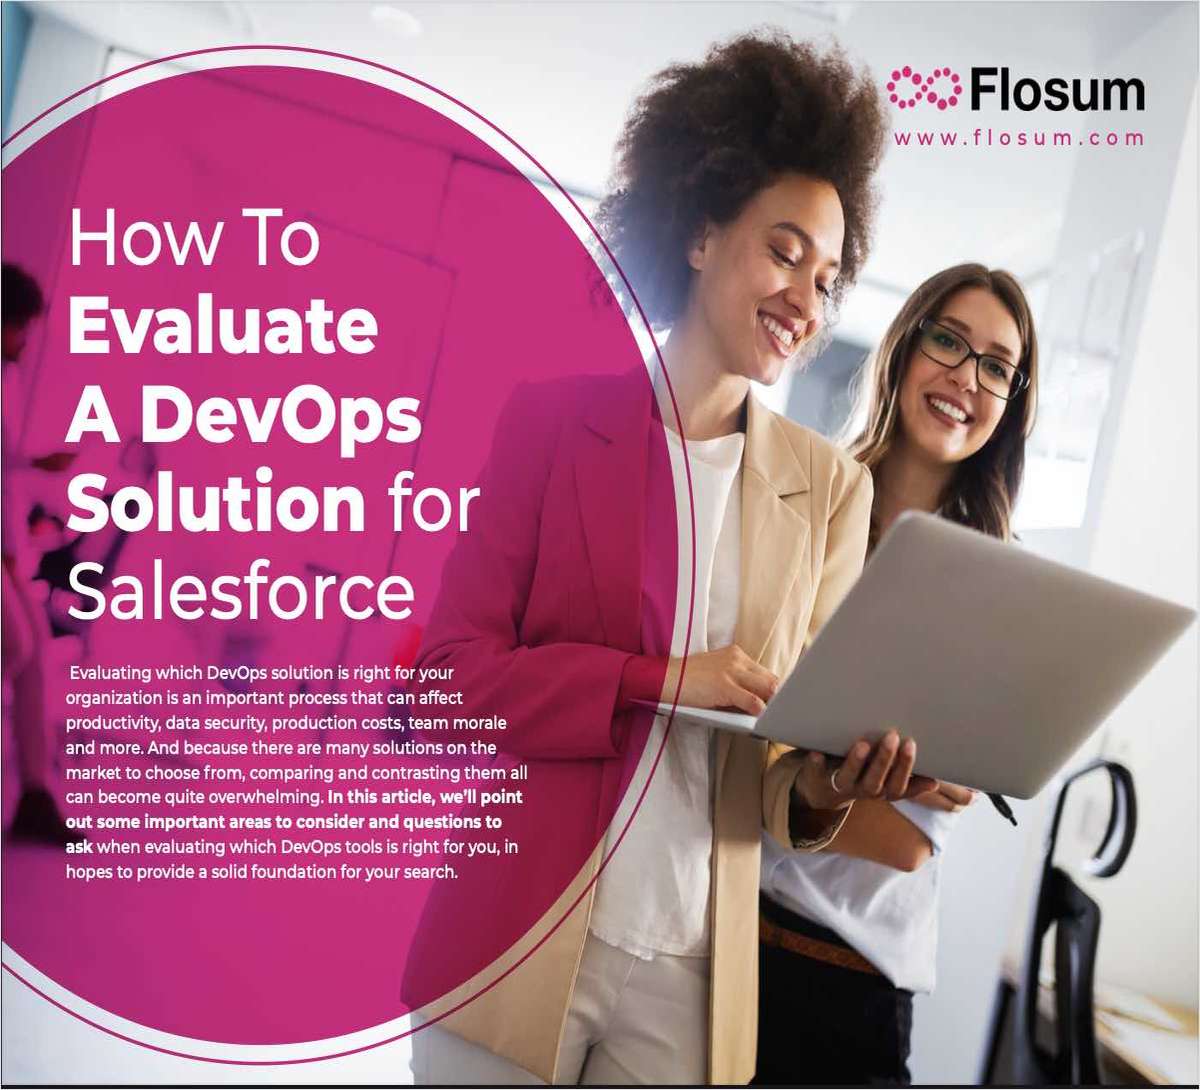 How To Evaluate A DevOps Solution for Salesforce